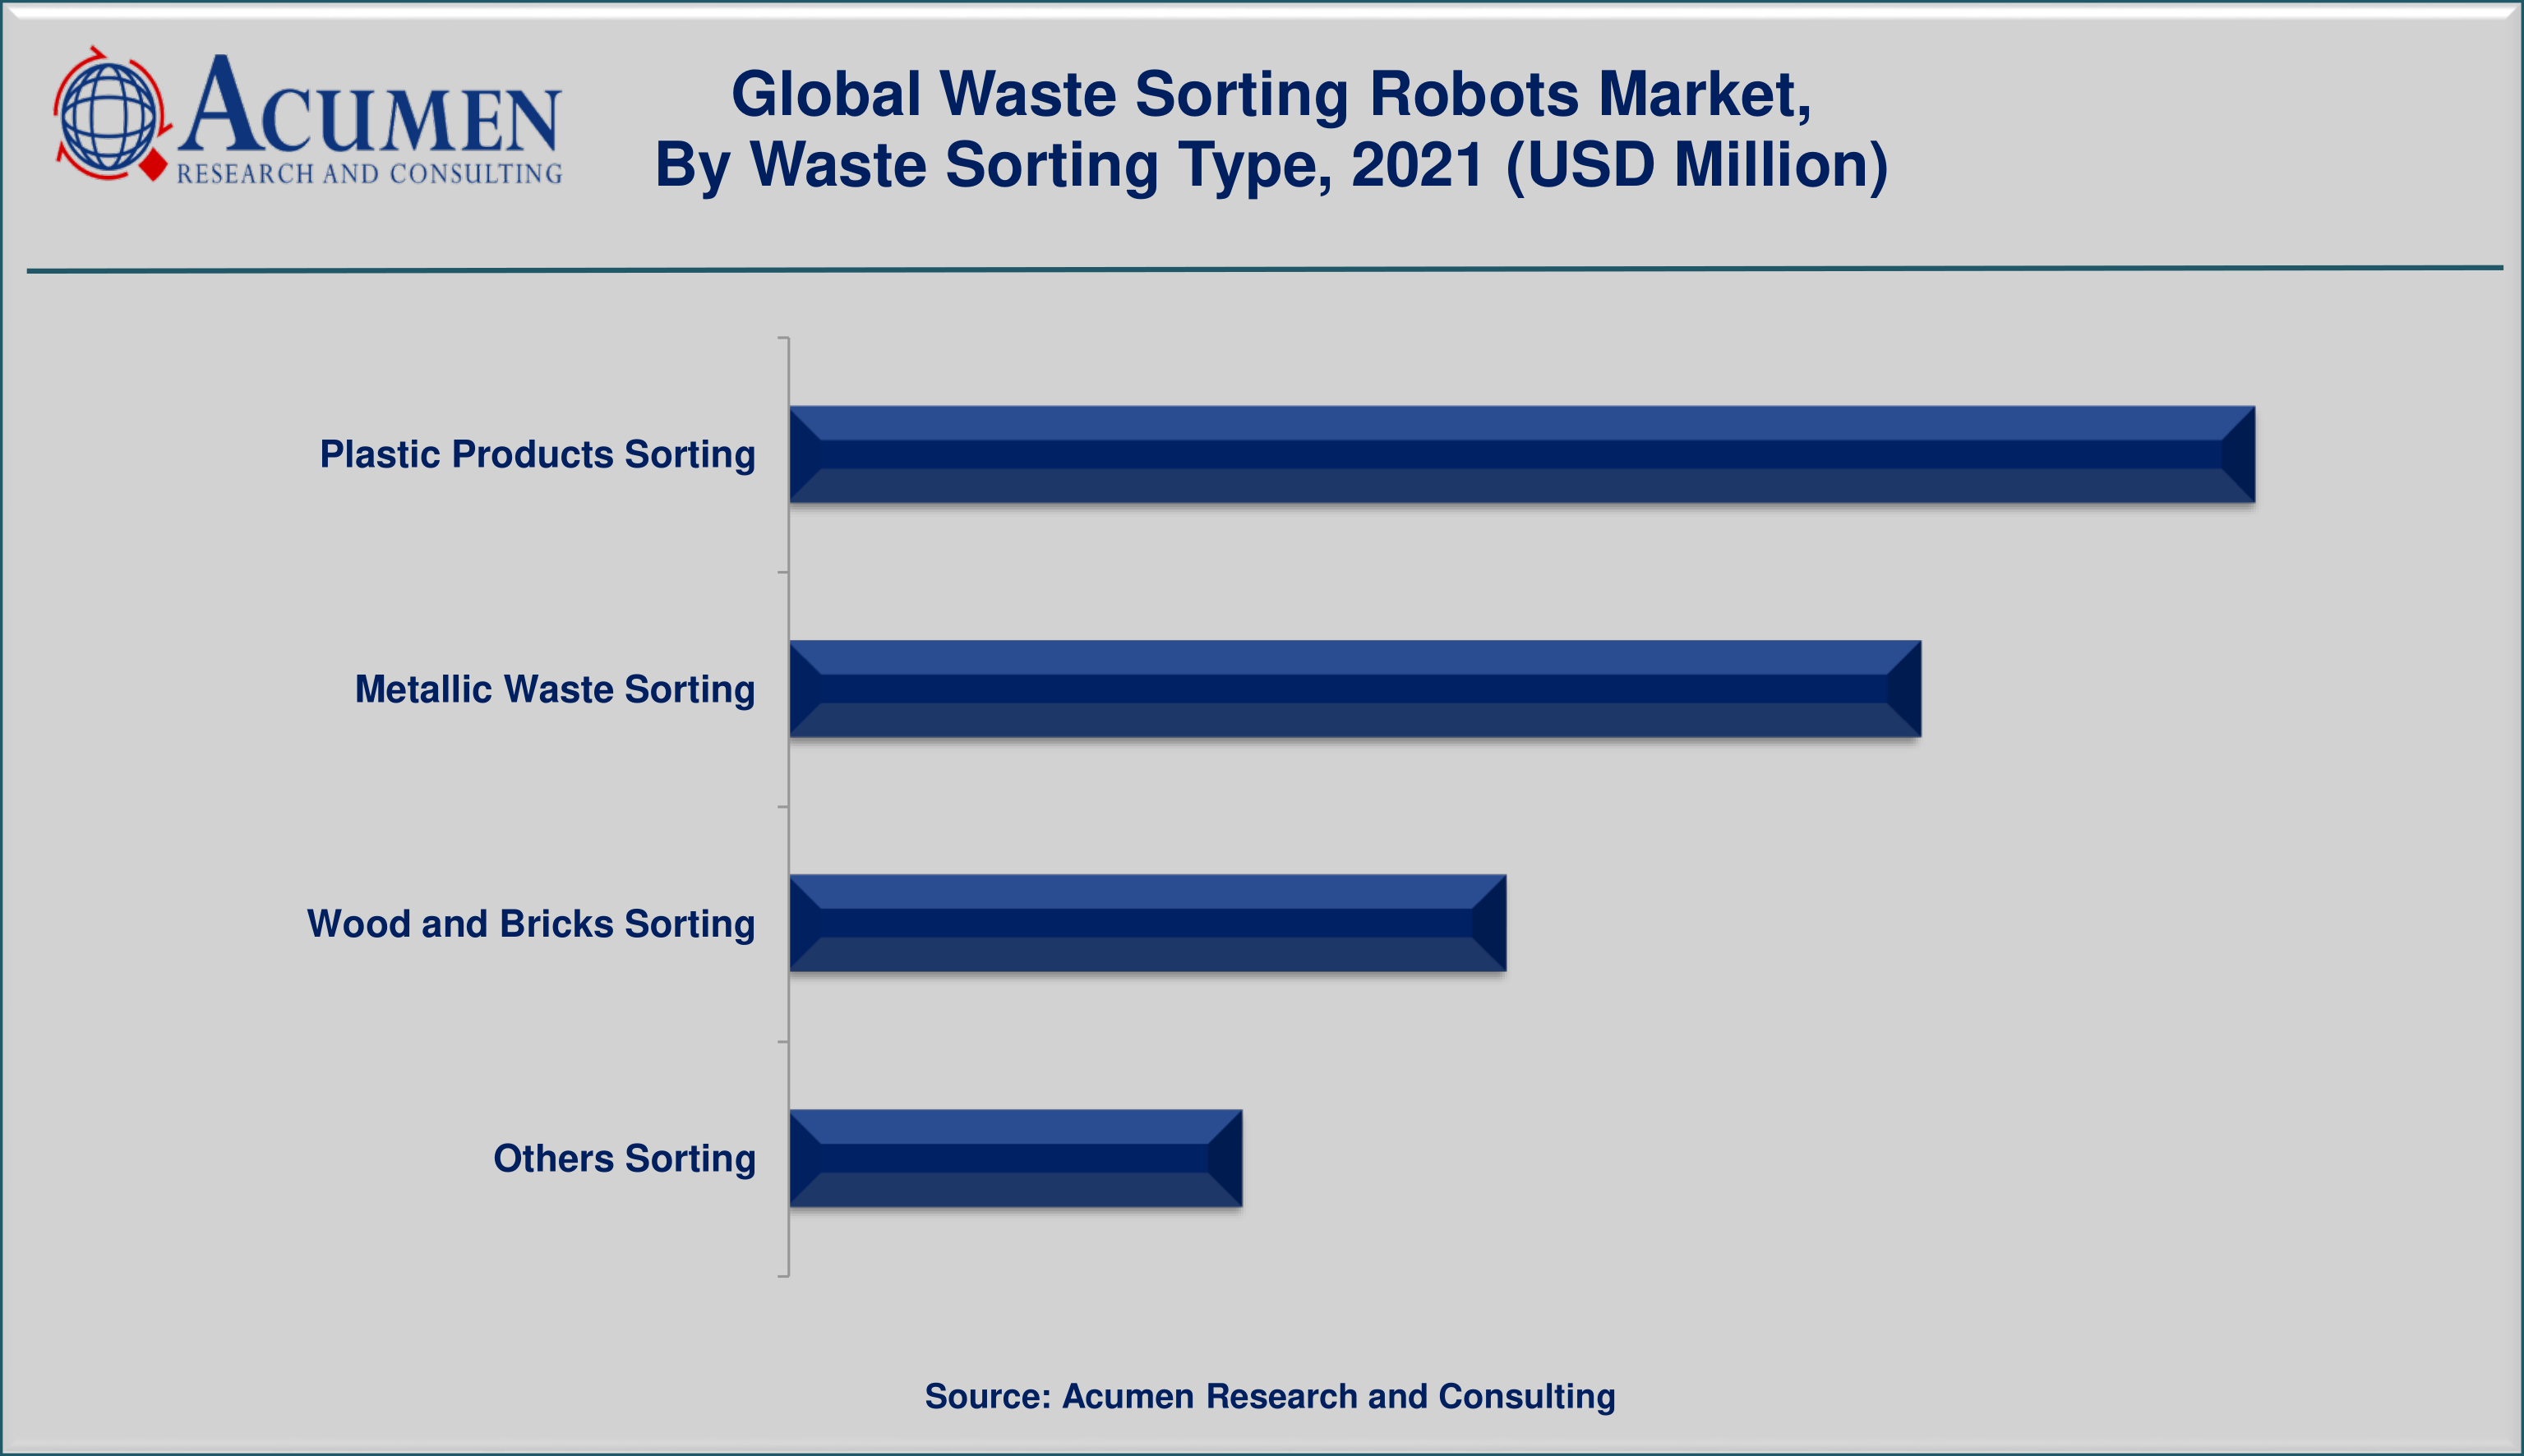 Waste Sorting Robots Market By Waste Sorting Type is projected to achieve a market size of USD 10,286 Million by 2030 budding at a CAGR of 19.1%